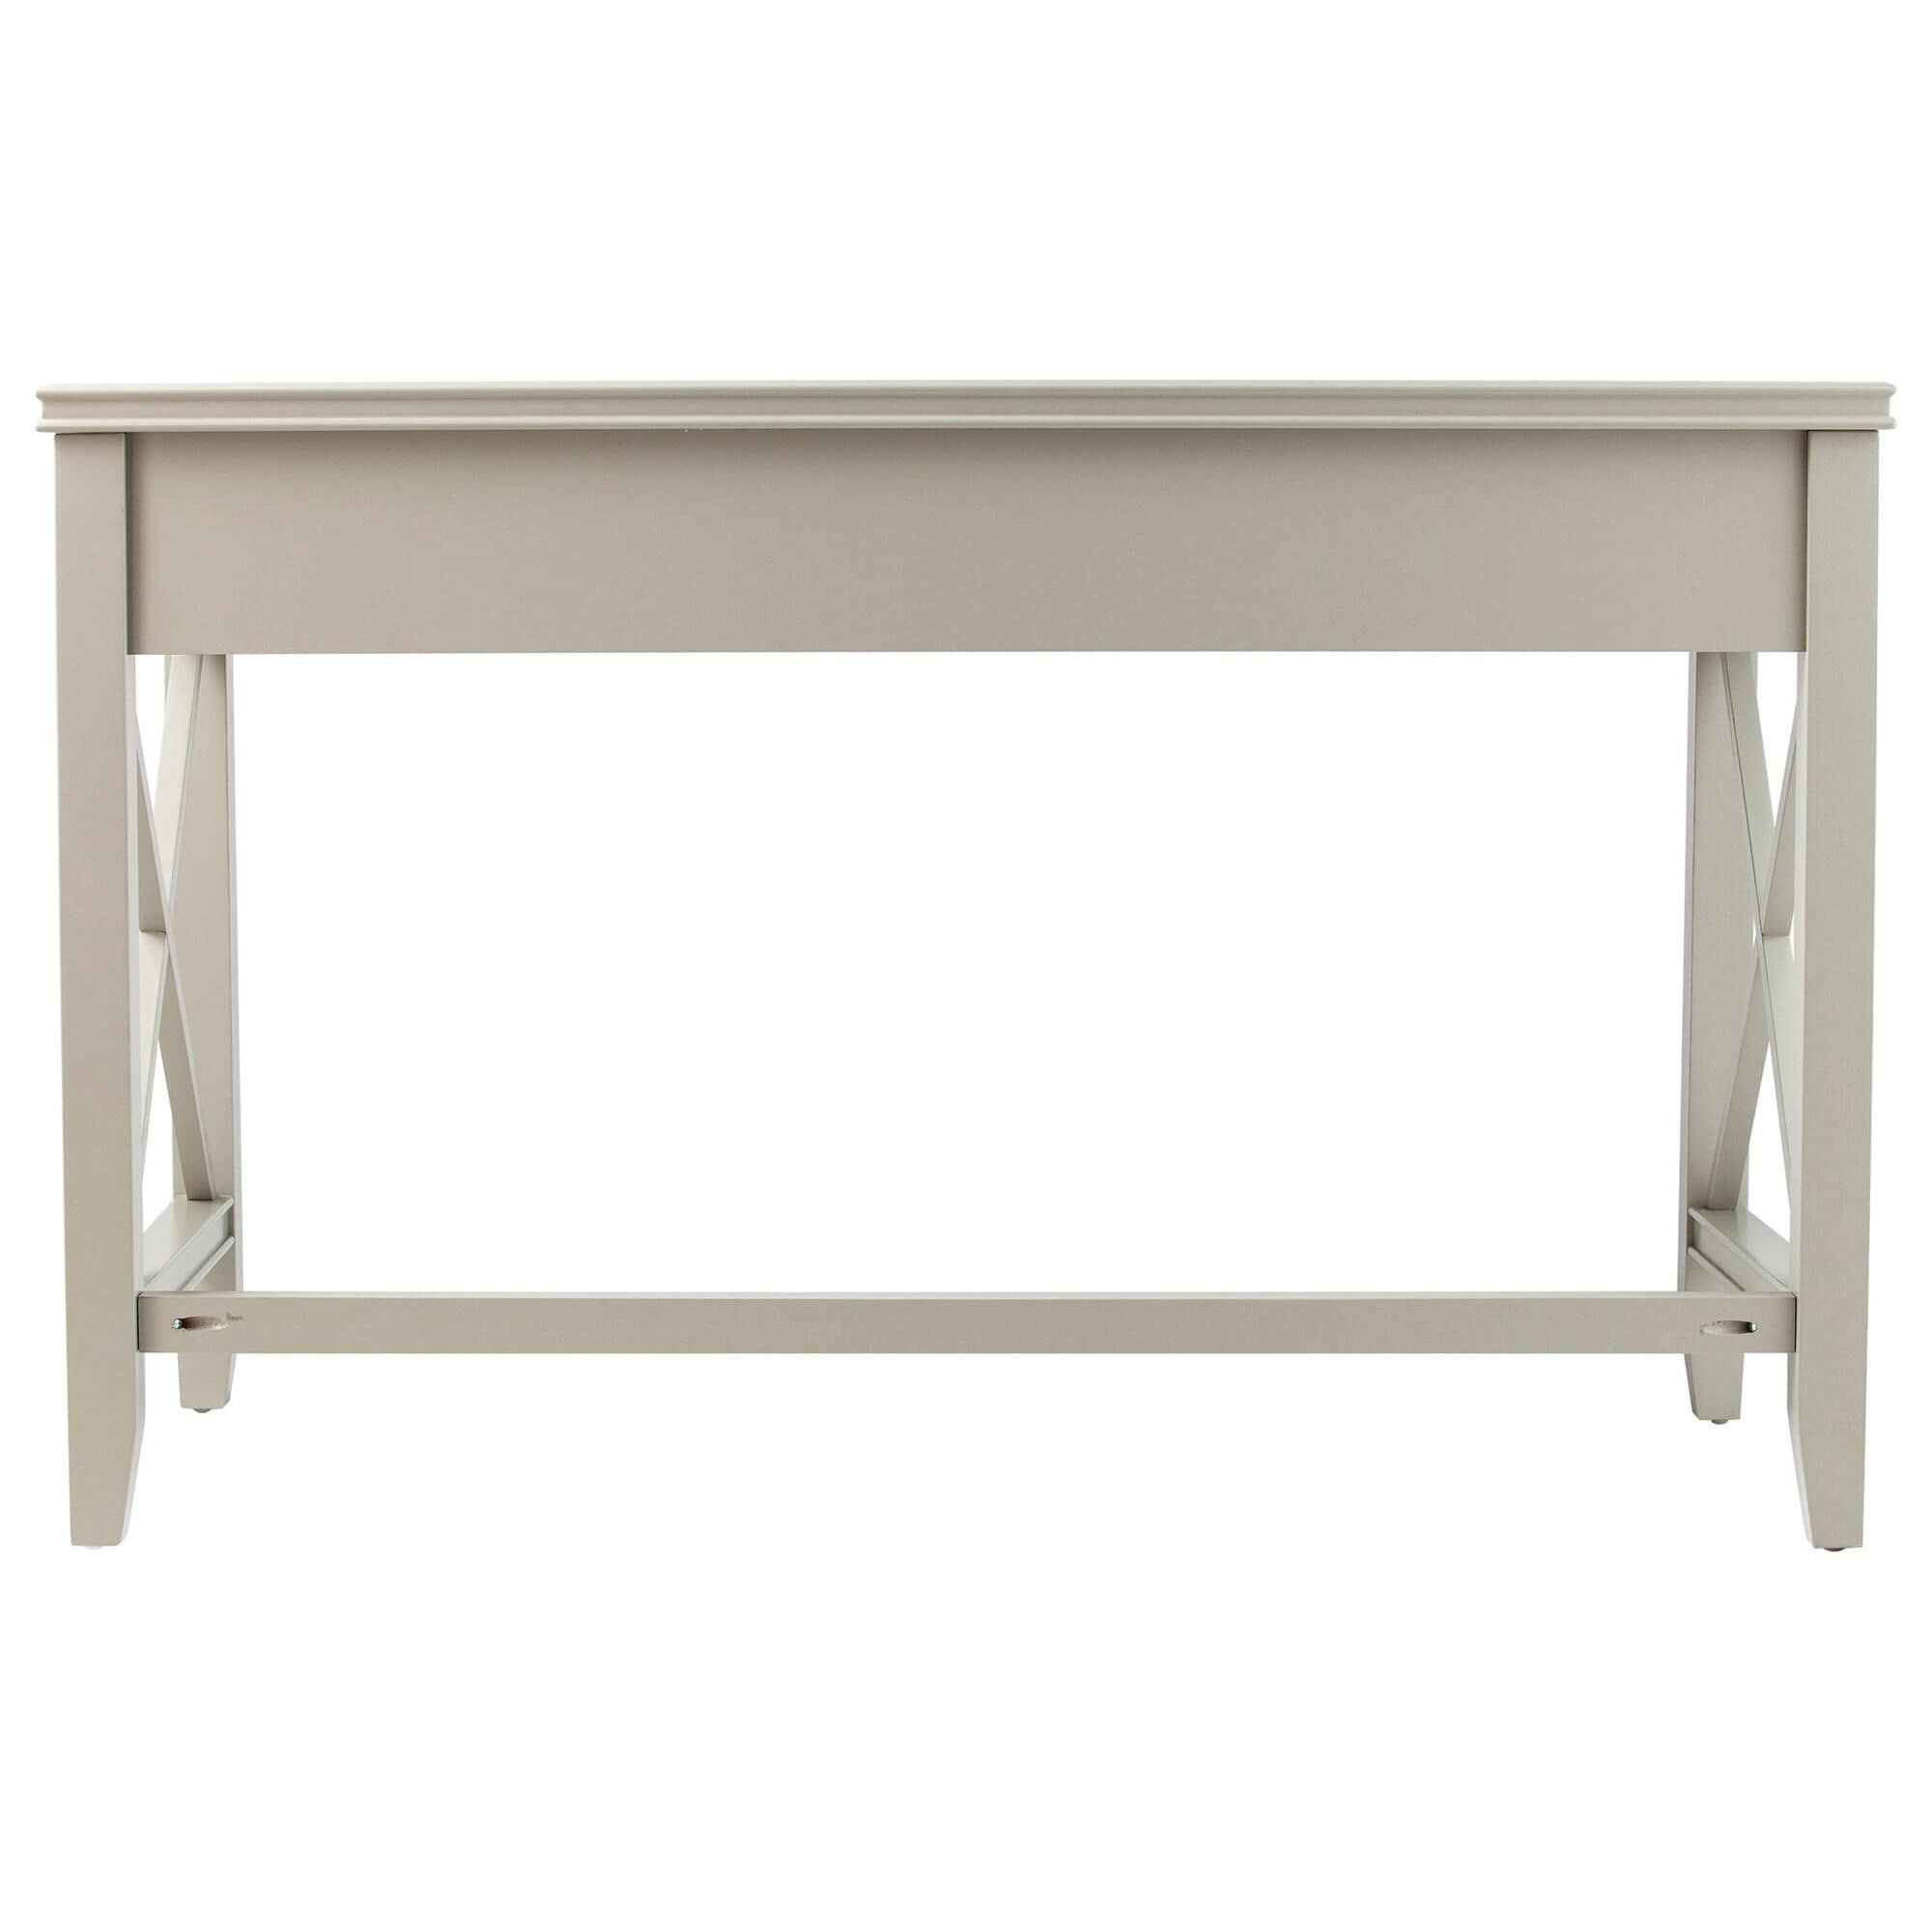 Southern Enterprises Larksmill Writing Desk In Gray And Silver | Nfm In  2023 | Nebraska Furniture Mart, Writing Desk, Southern Enterprises In Southern Enterprises Larksmill Coffee Tables (View 6 of 6)